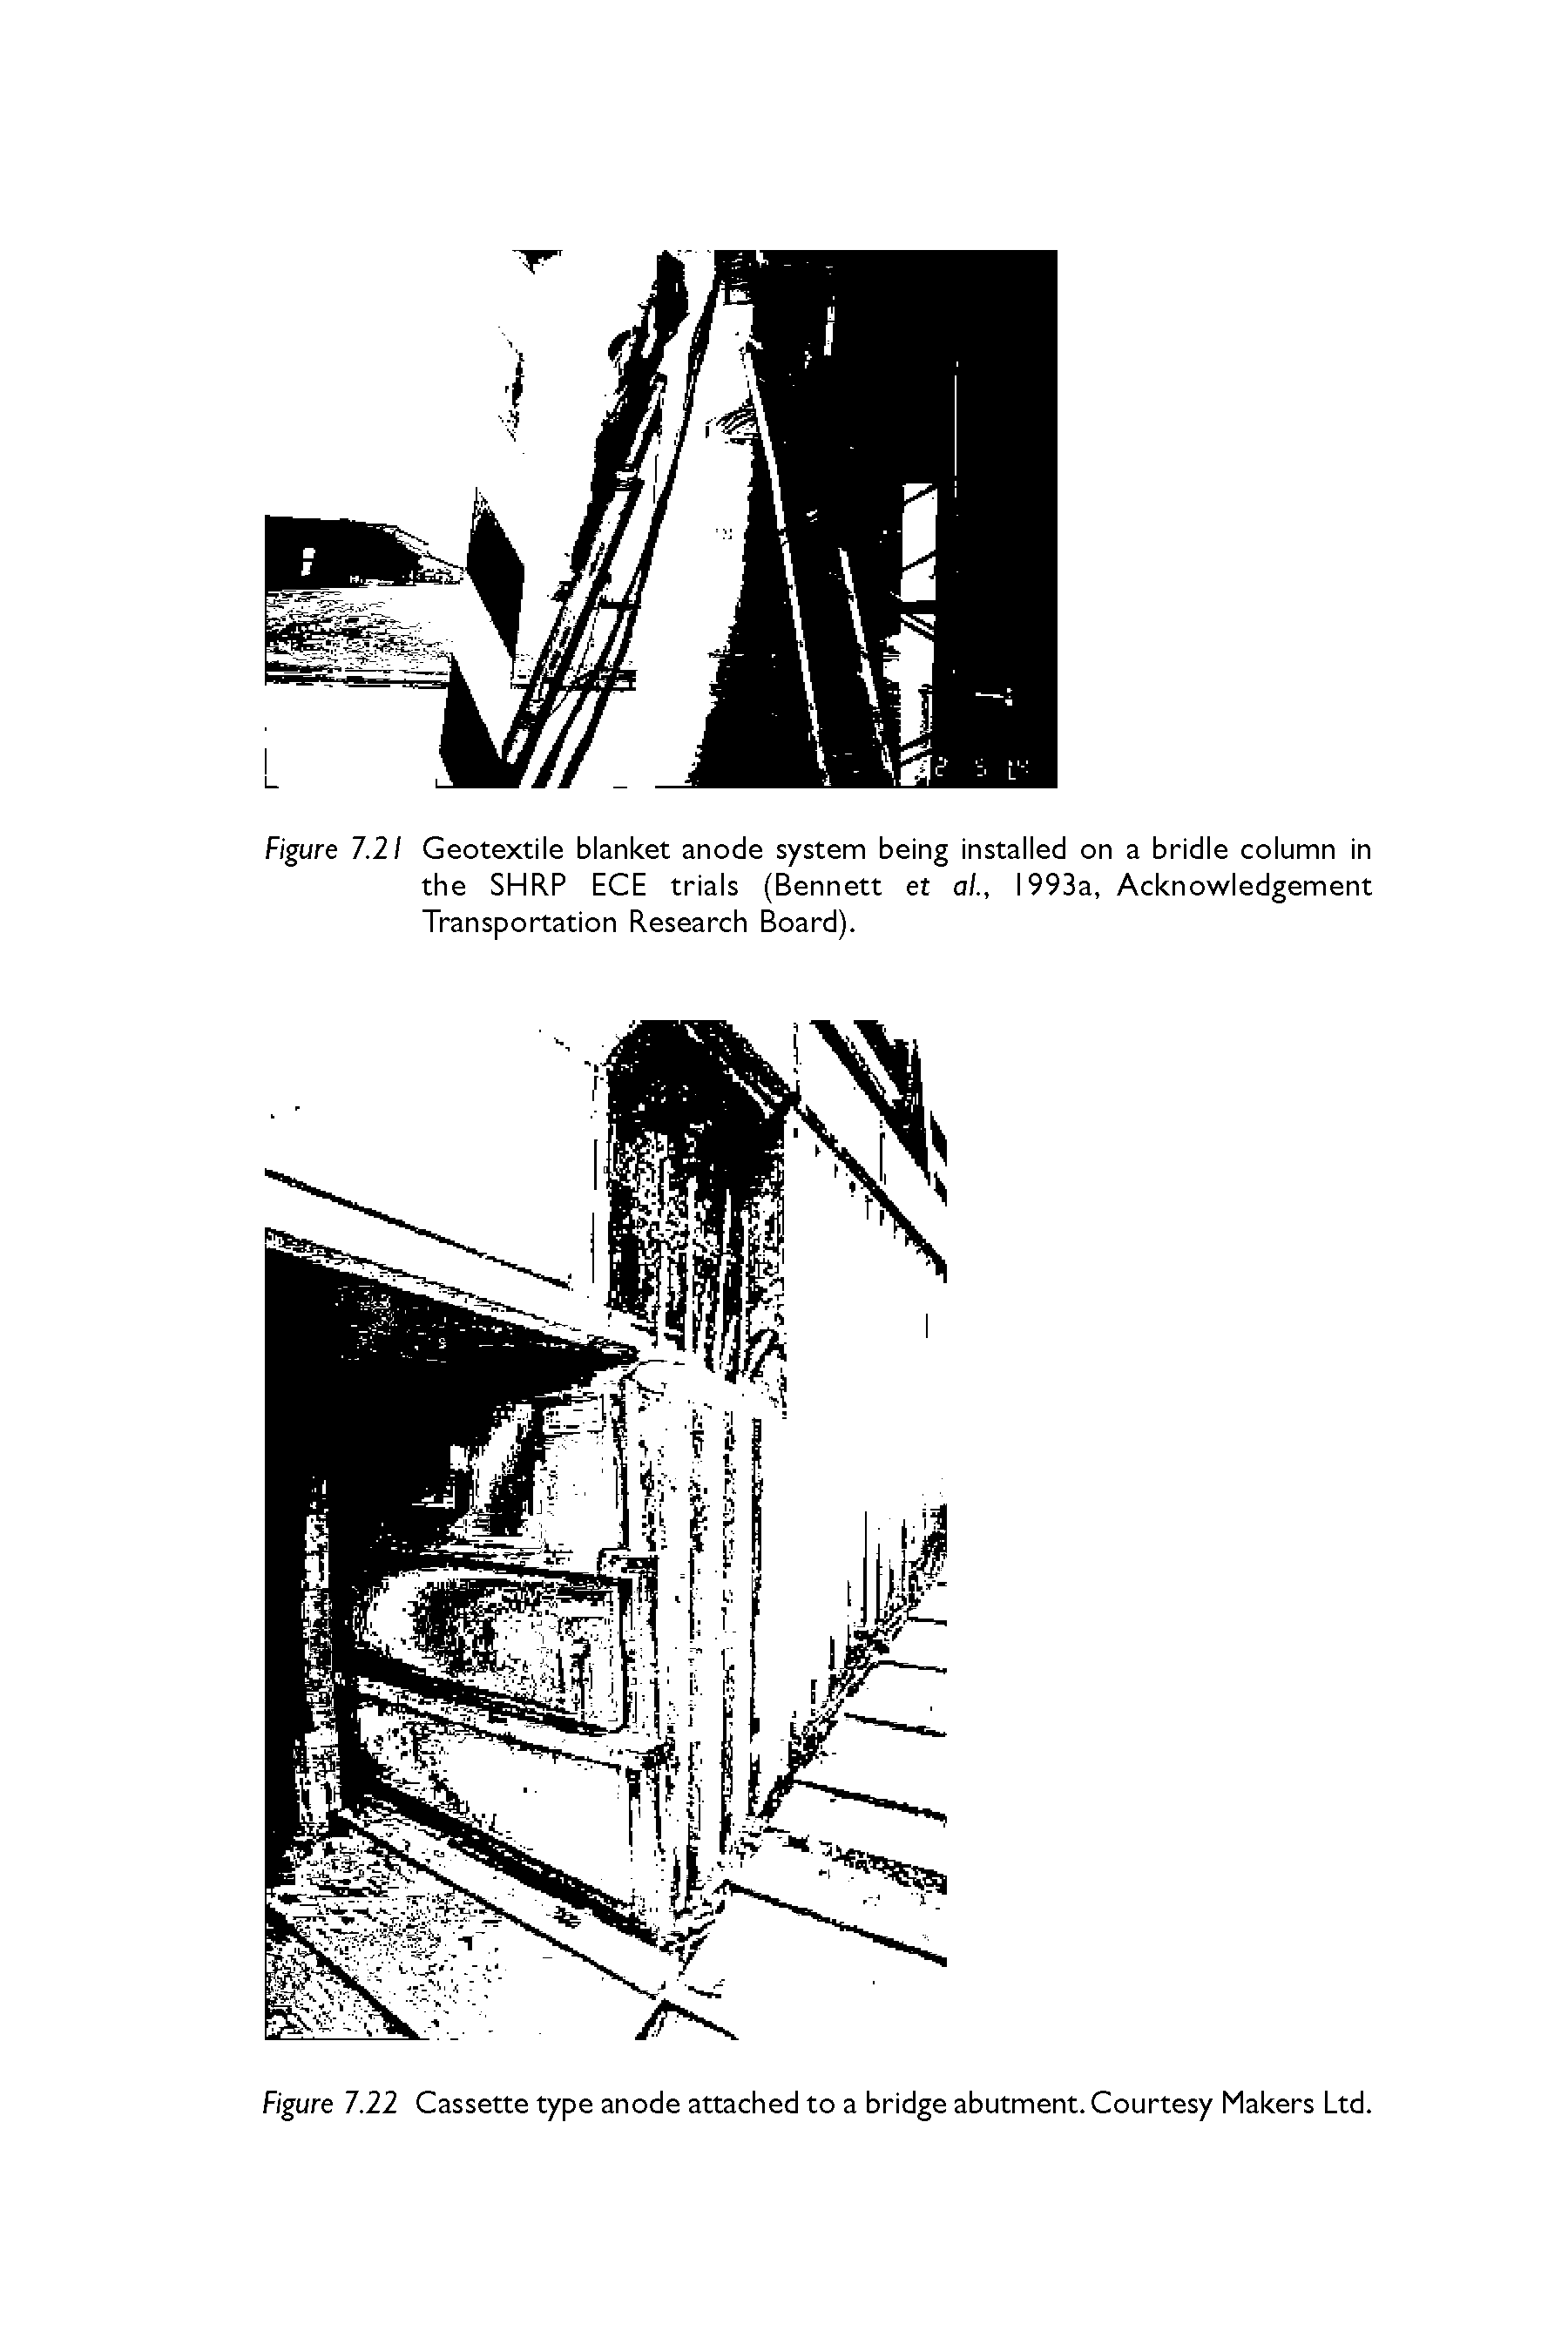 Figure 7.22 Cassette type anode attached to a bridge abutment. Courtesy Makers Ltd.